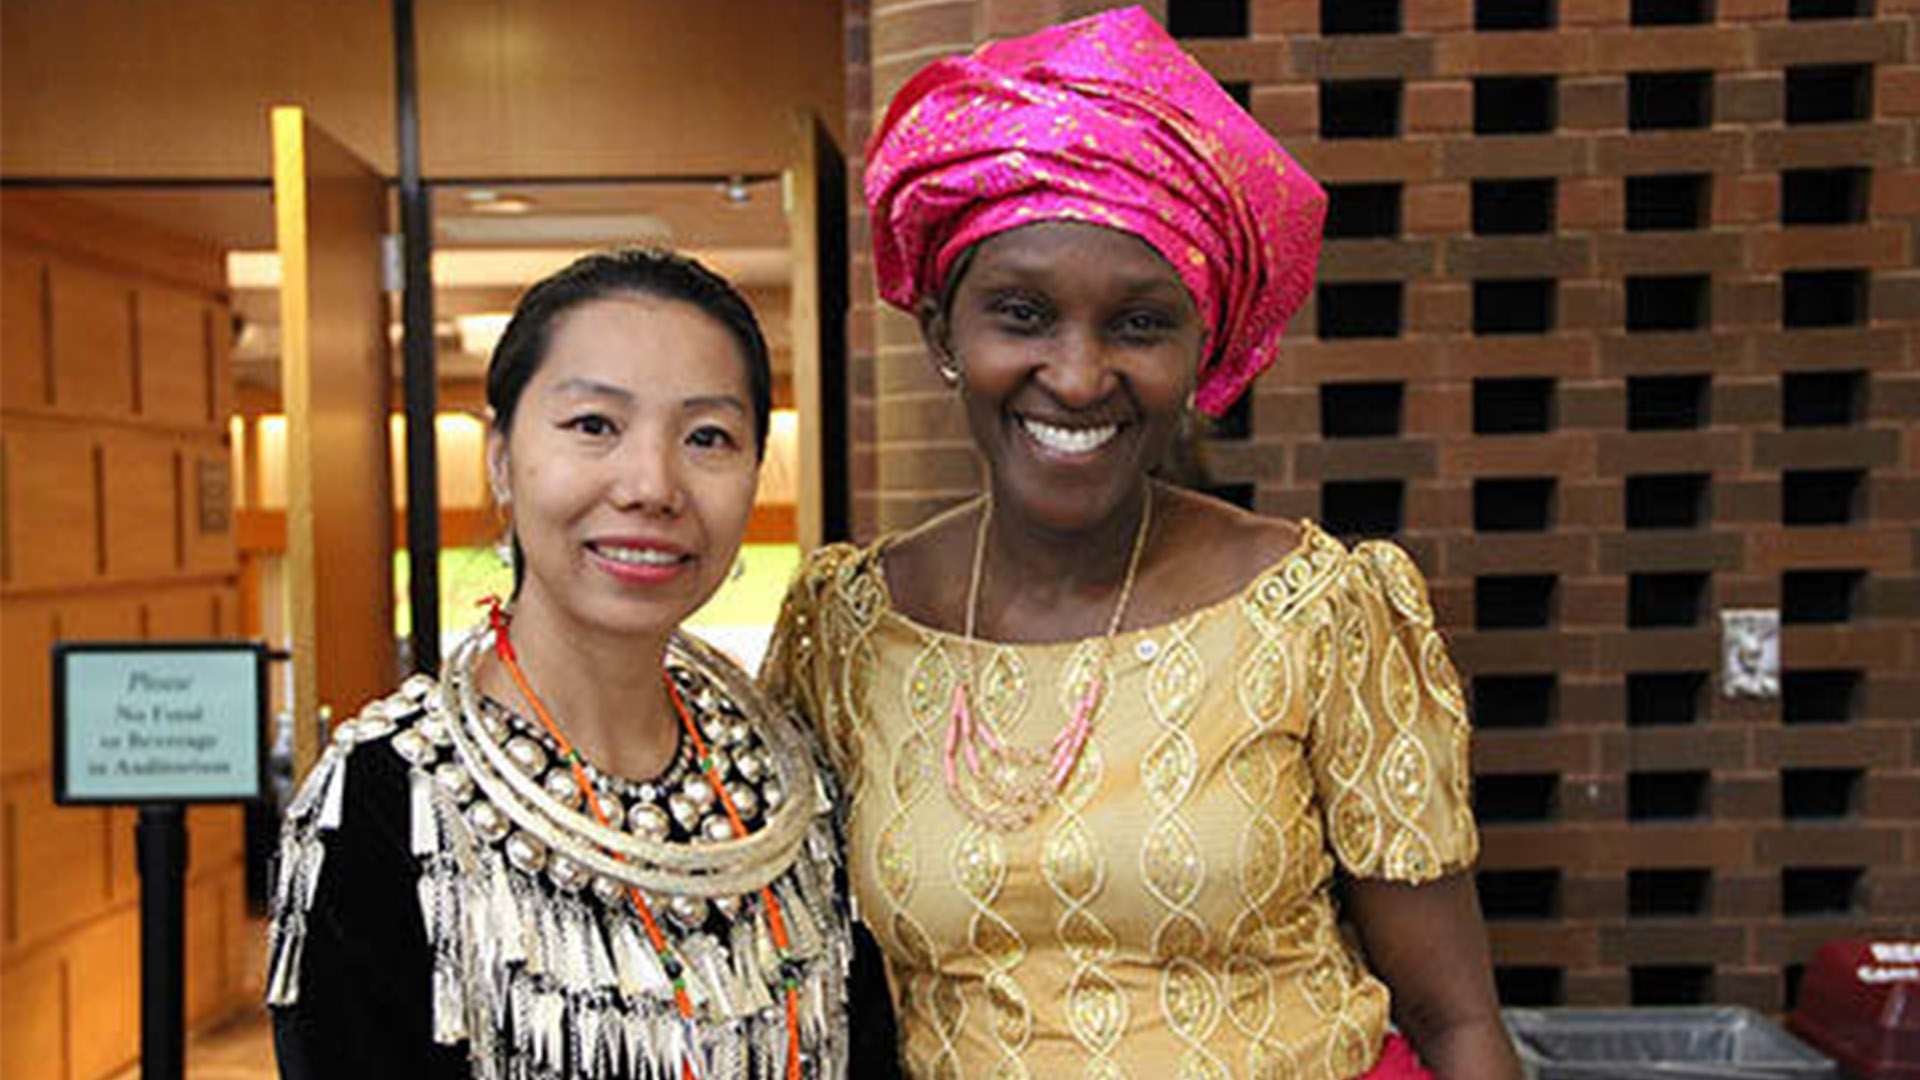 Two Humphrey School International Fellows pose in traditional clothing outside Cowles Auditorium